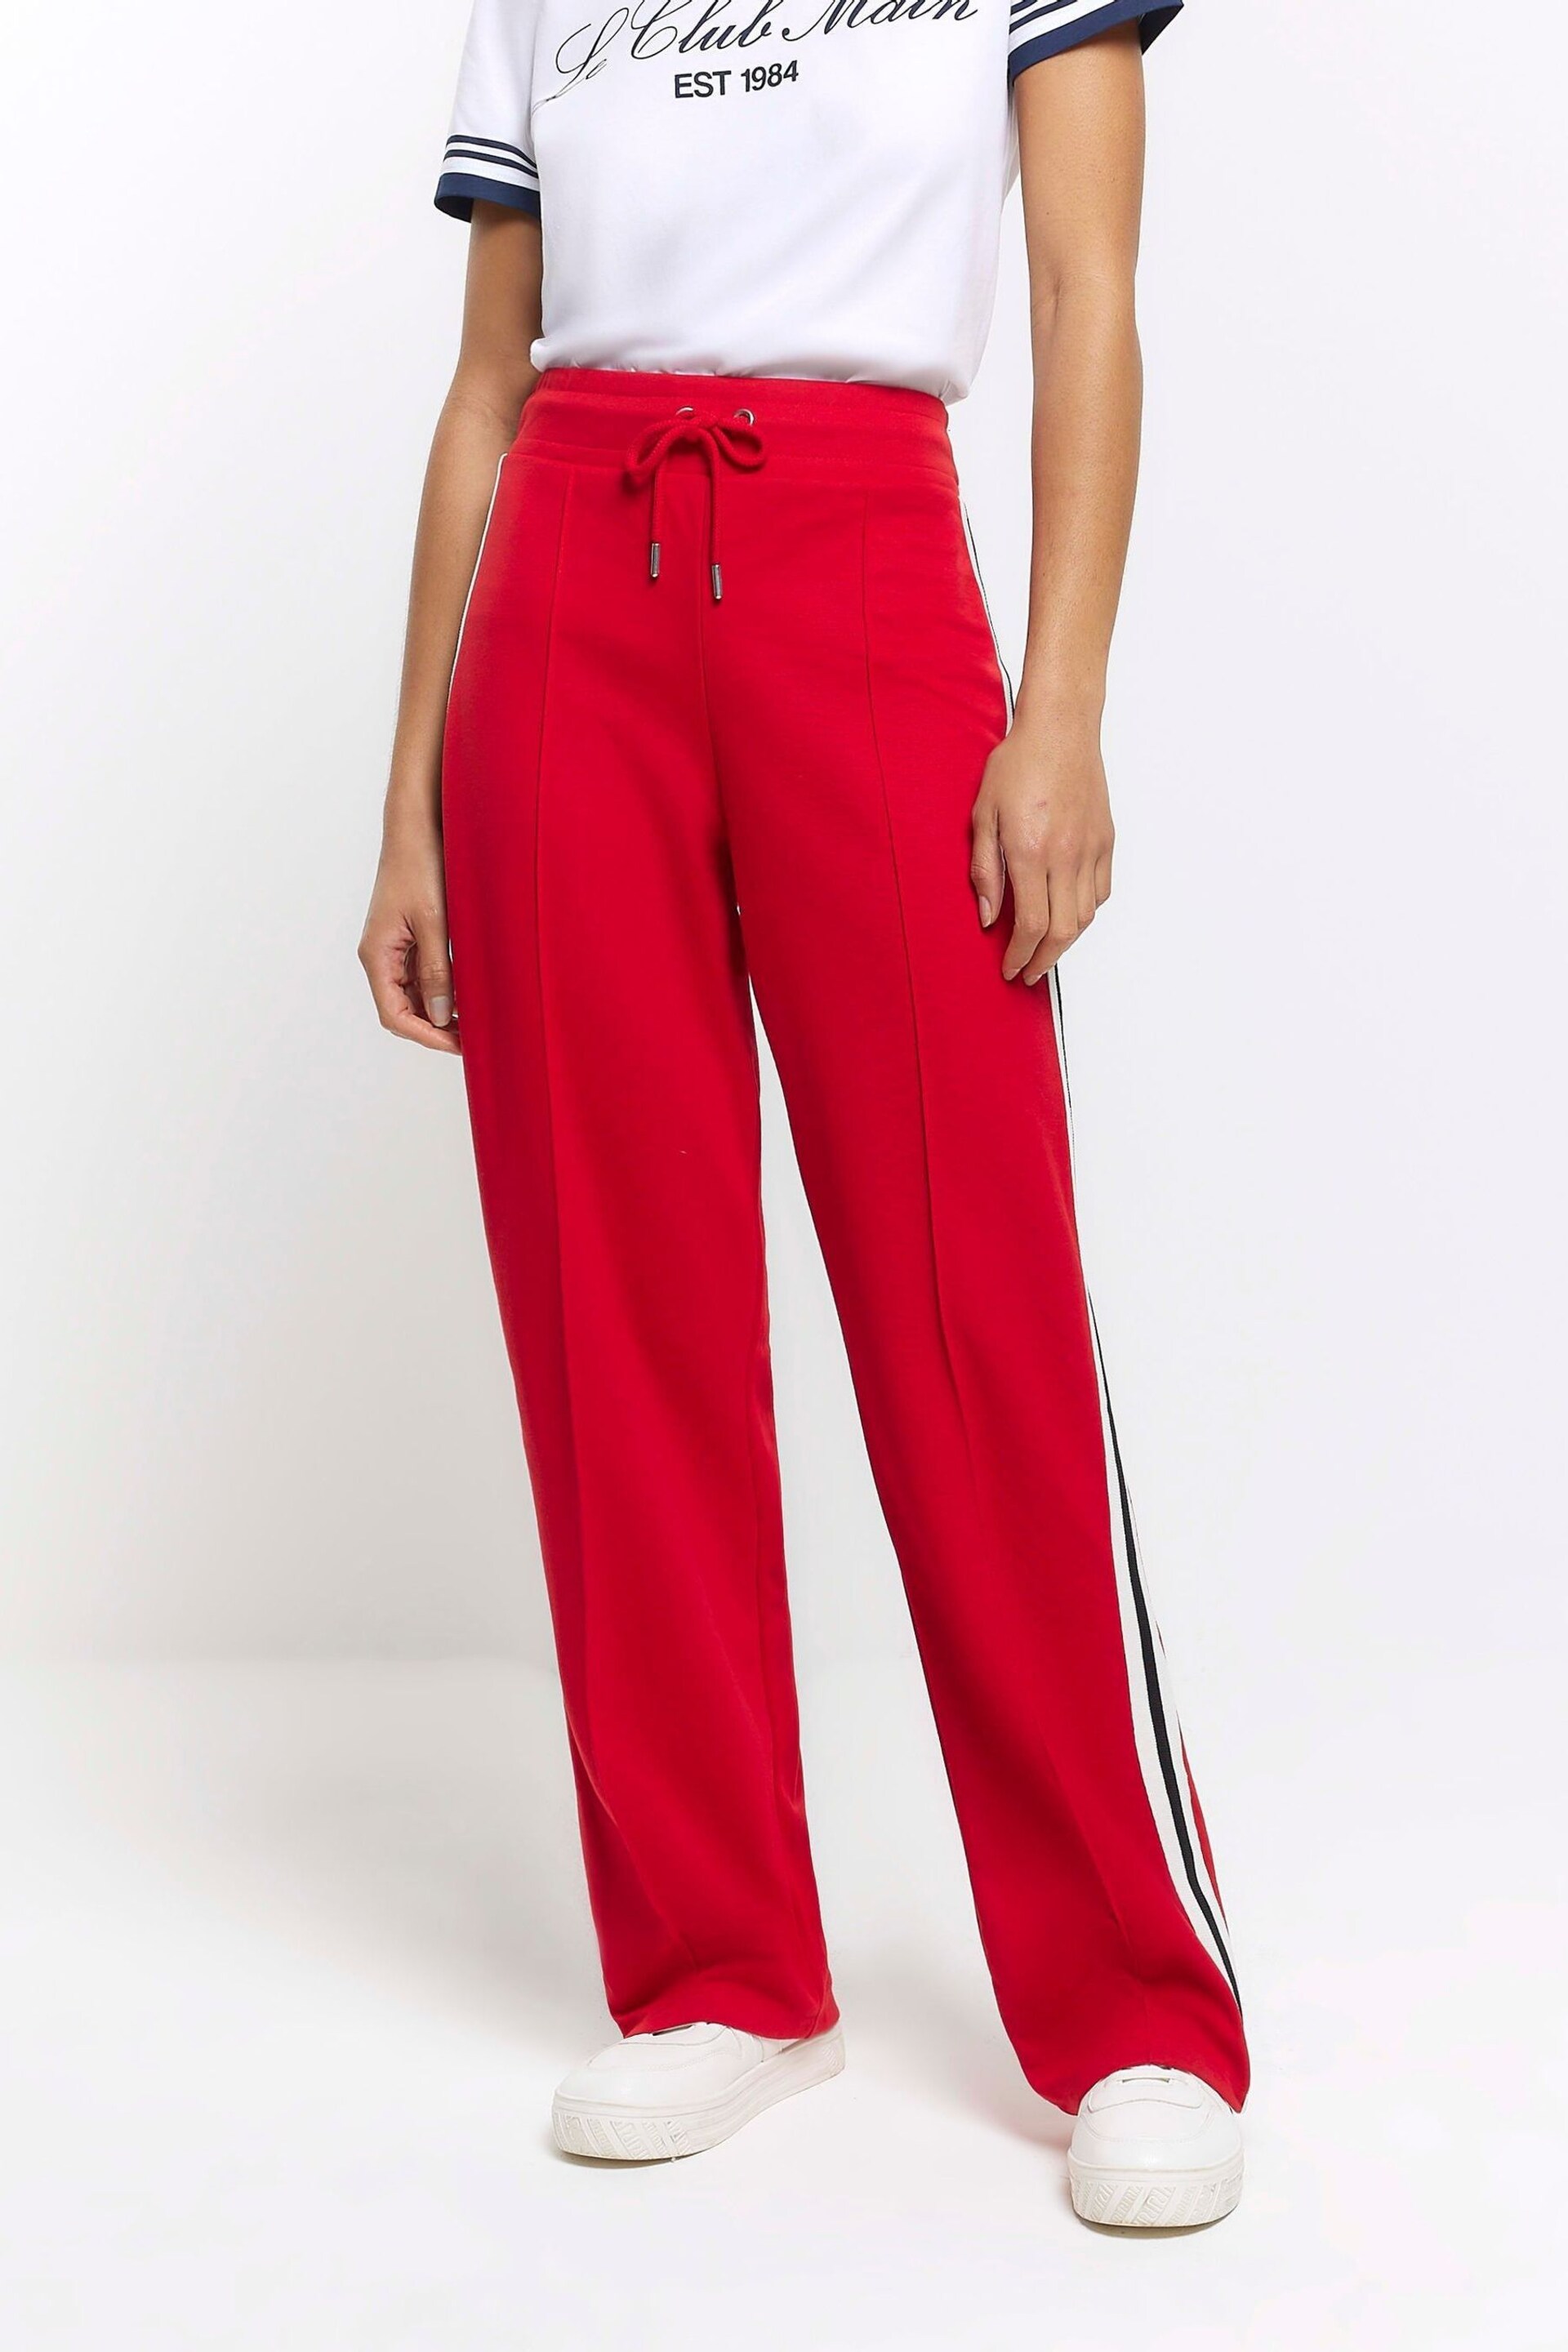 River Island Red Casual Wide Leg Side Stripe Joggers - Image 1 of 5